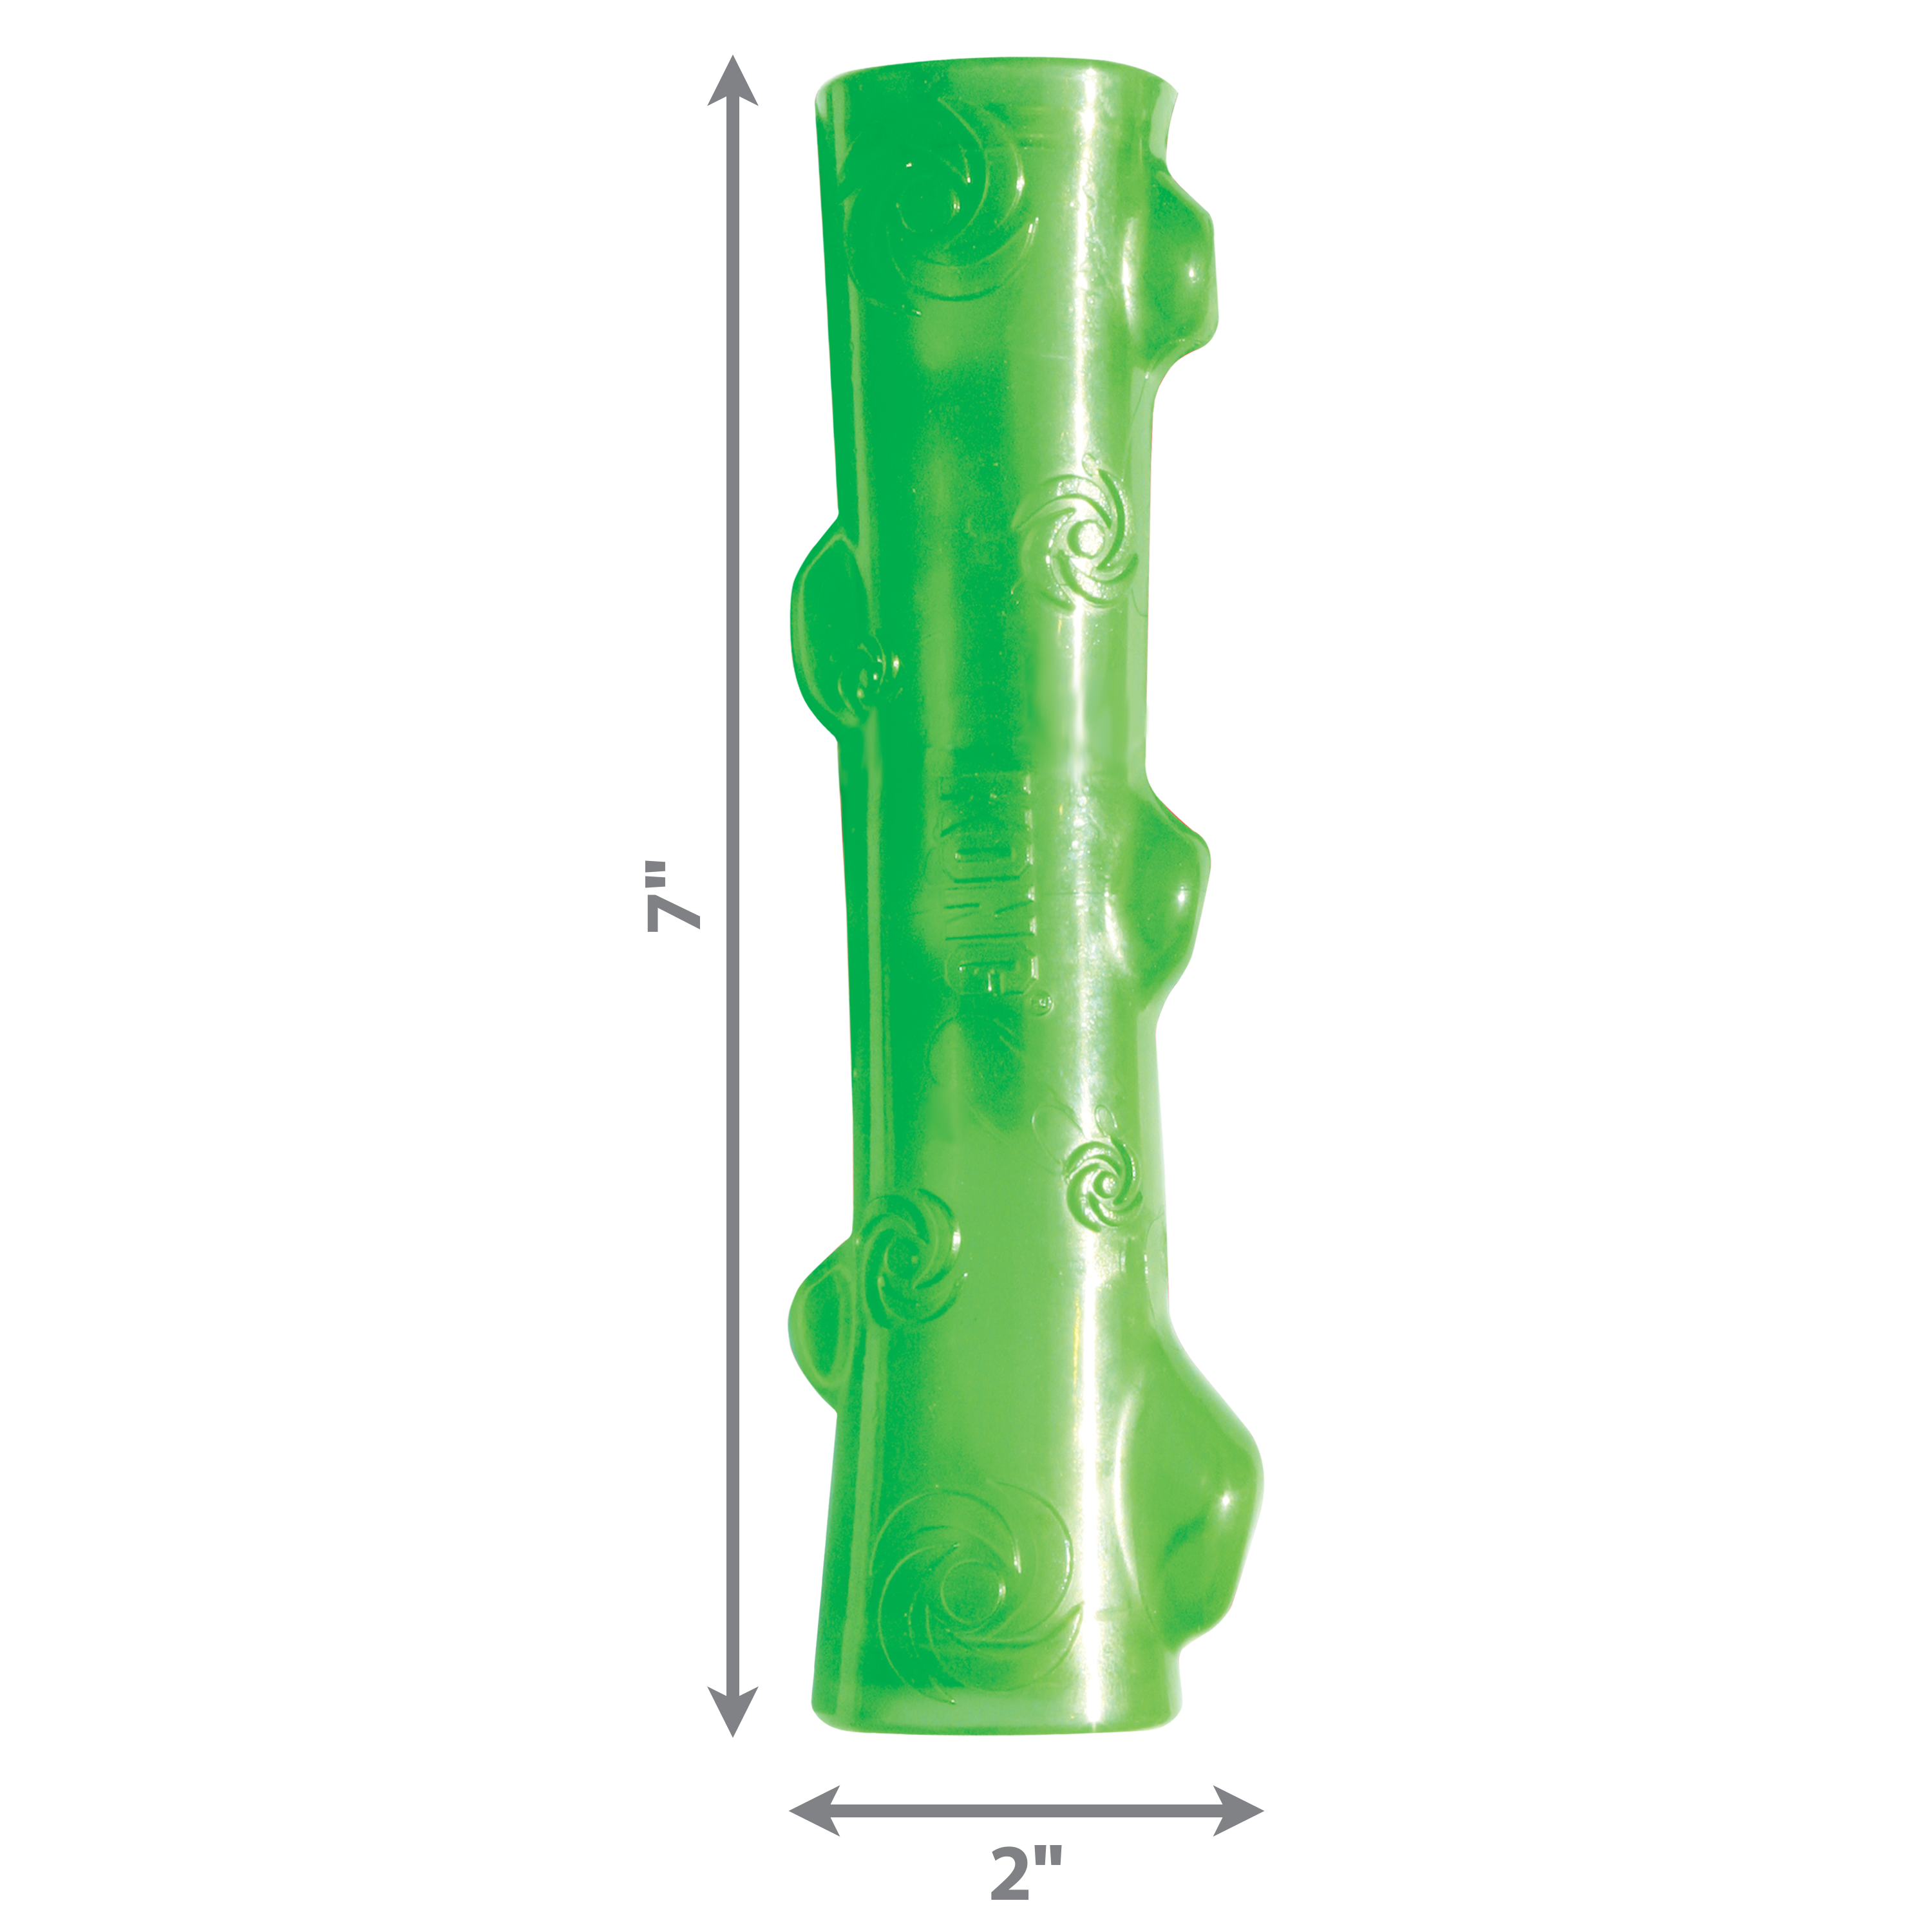 Squeezz Stick dimoffpack product image